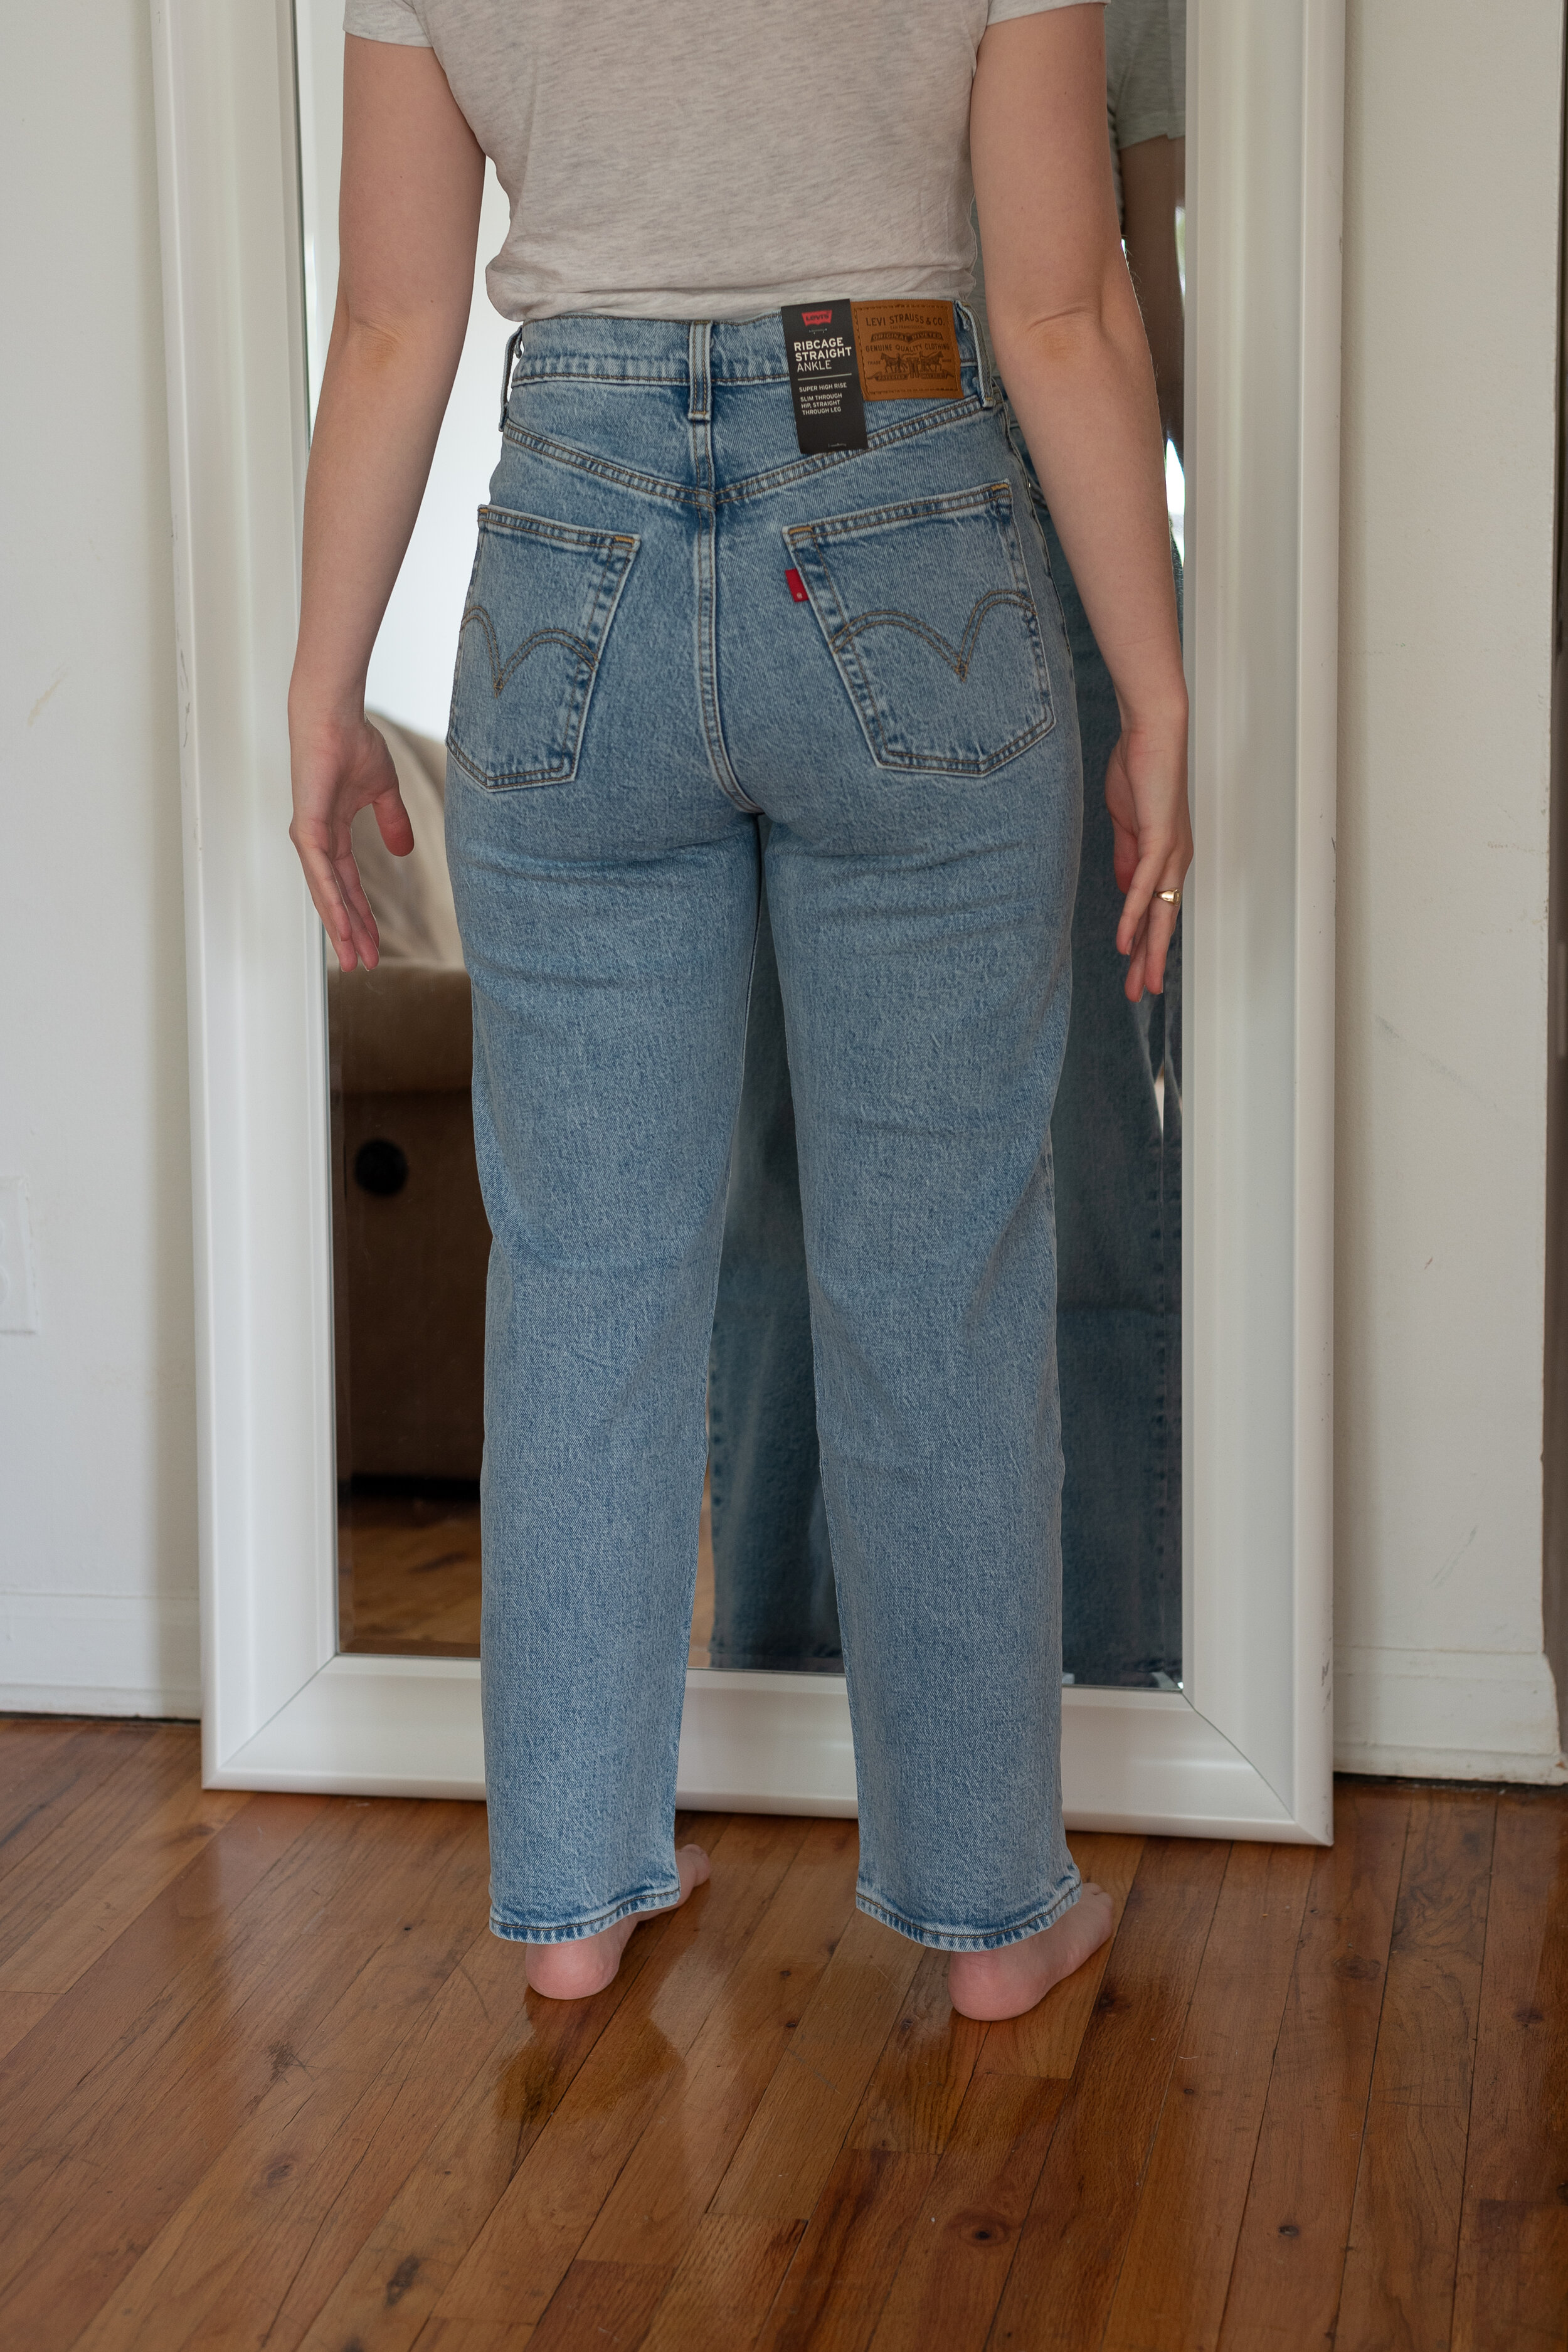 ARE LEVI'S JEANS PETITE PEAR FRIENDLY? — The Petite Pear Project